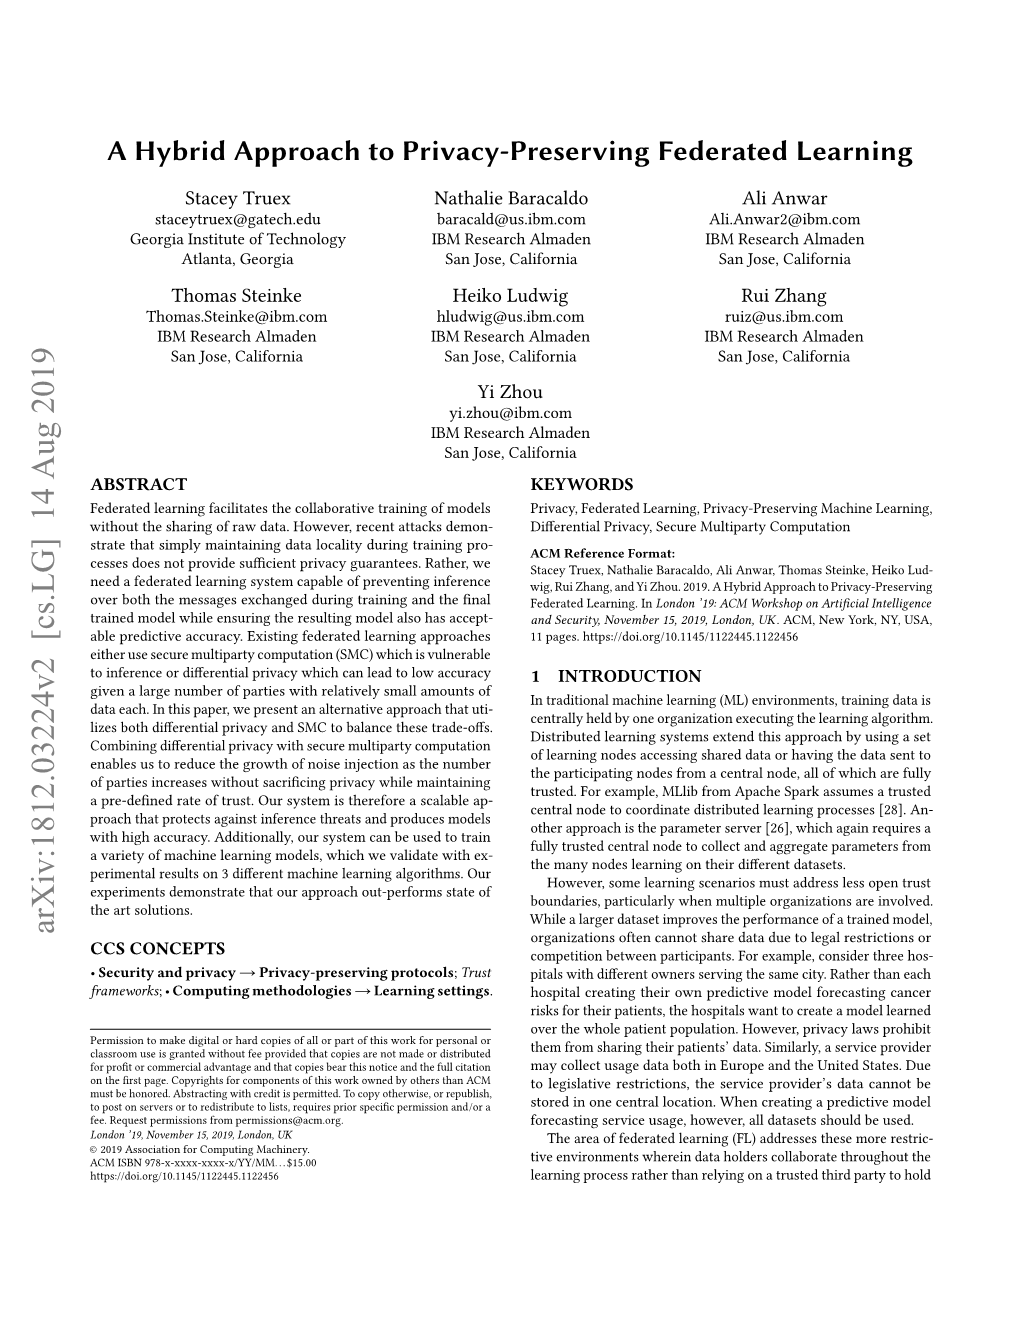 A Hybrid Approach to Privacy-Preserving Federated Learning